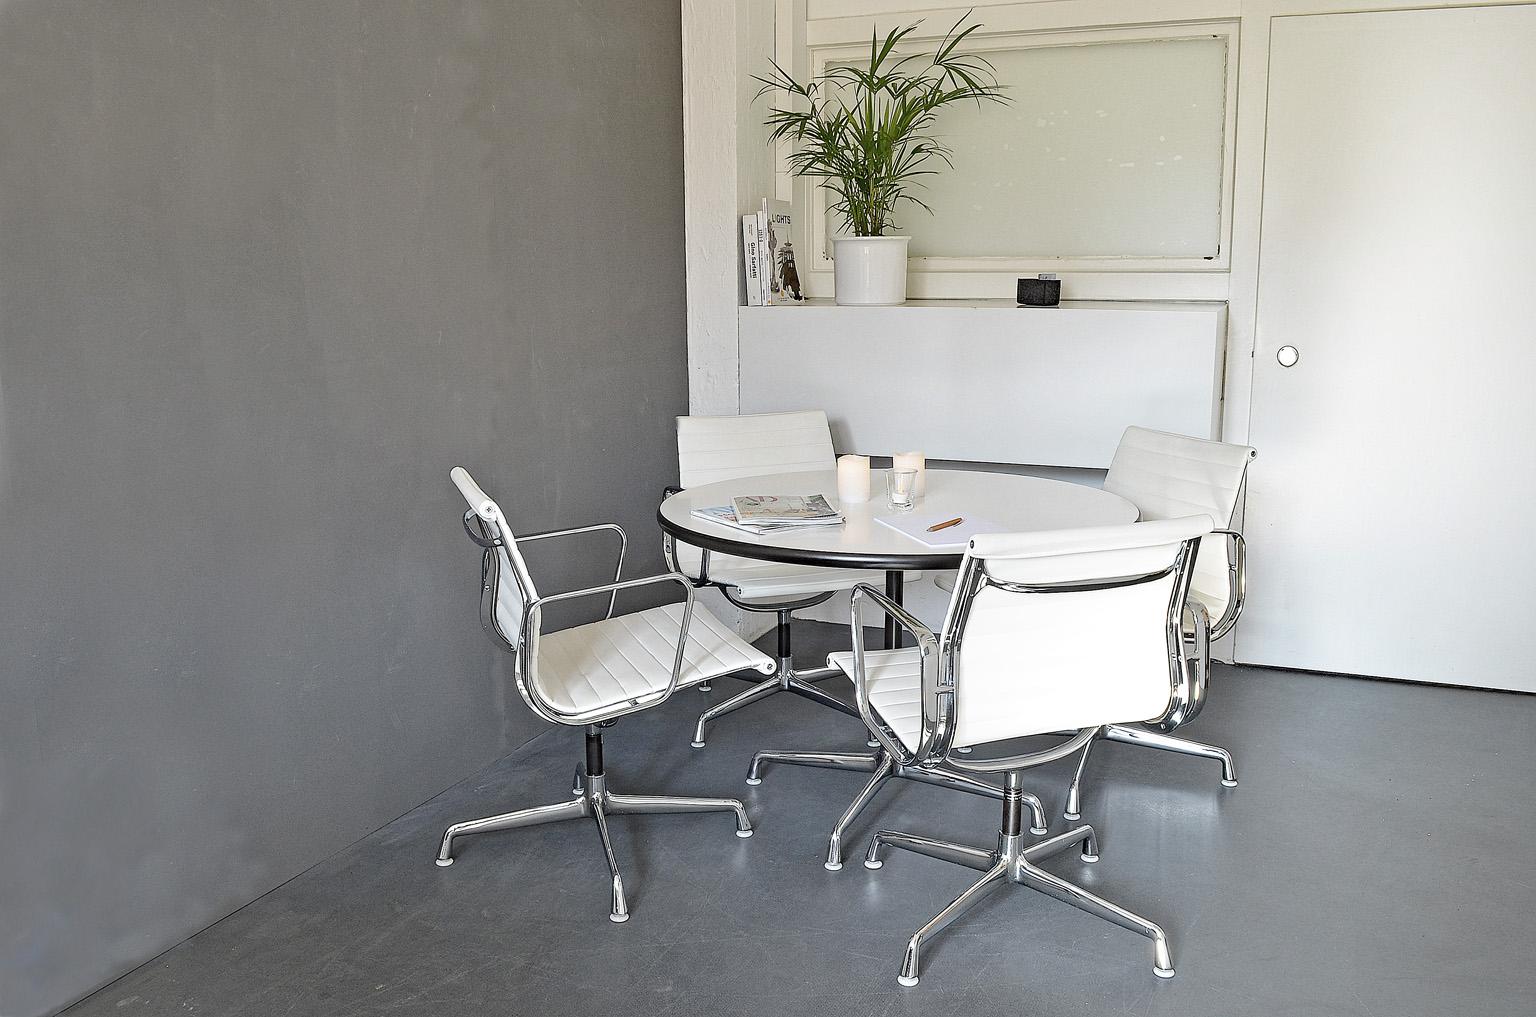 German 4 Swivelchair EA108 & Table by Charles&Ray Eames for Herman Miller Made by Vitra